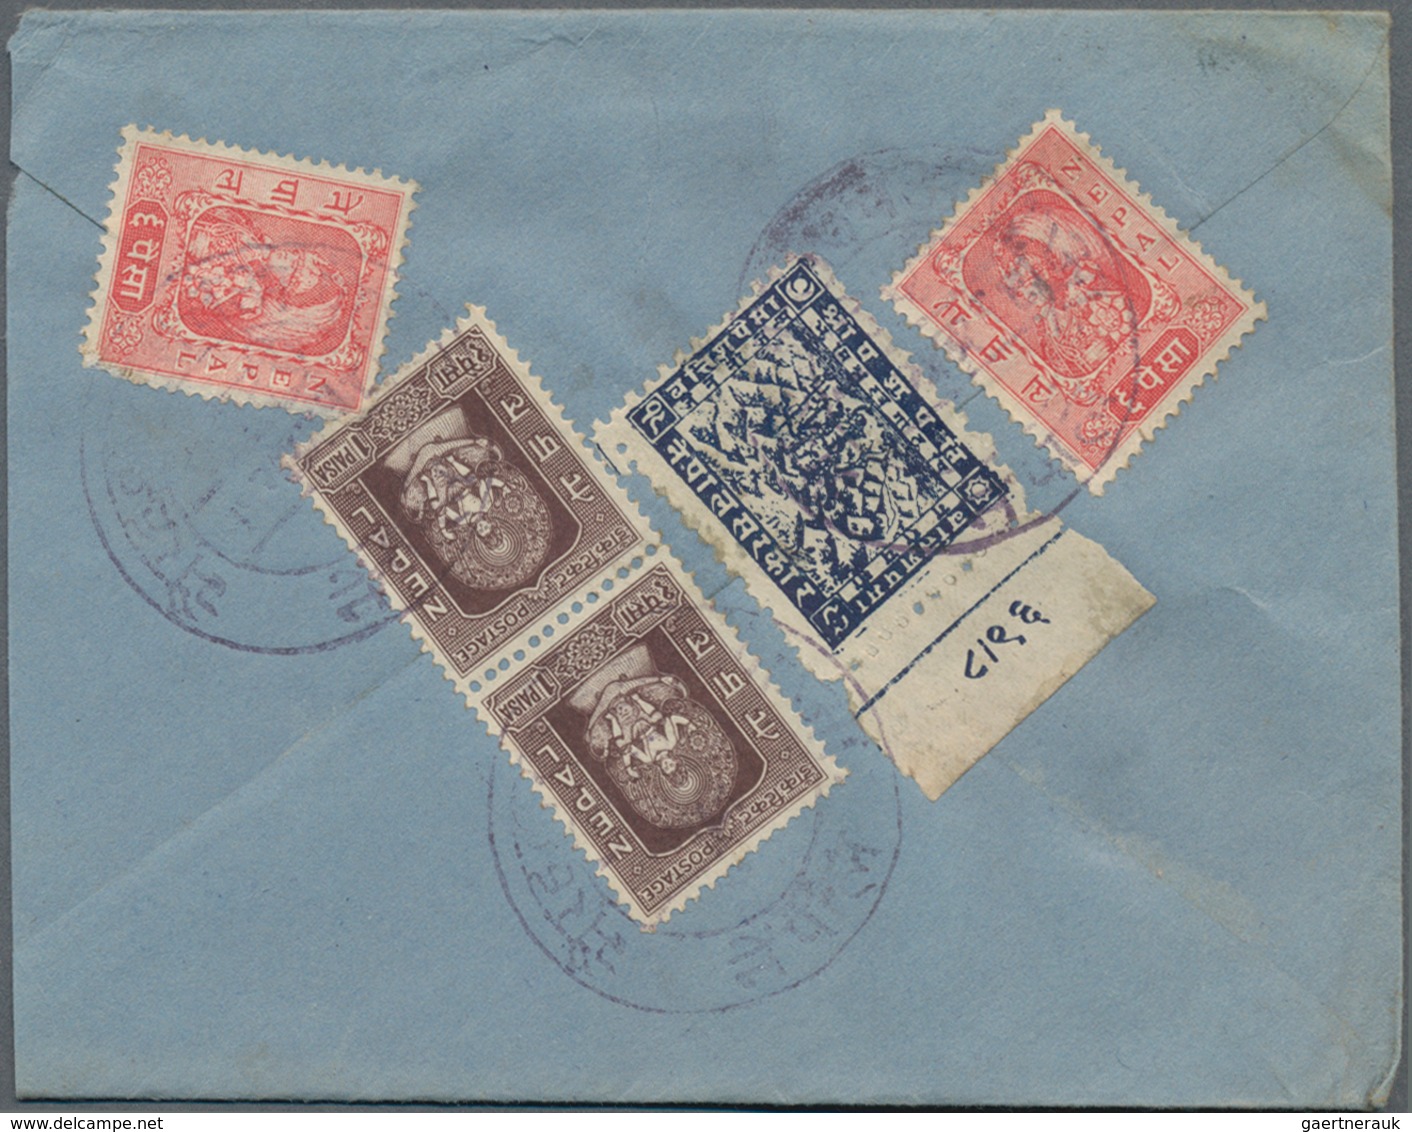 Nepal: 1899-1950's: More Than 60 Stamps Including 1899 ½a. Block Of 42 Used, Late Issues Of First De - Nepal